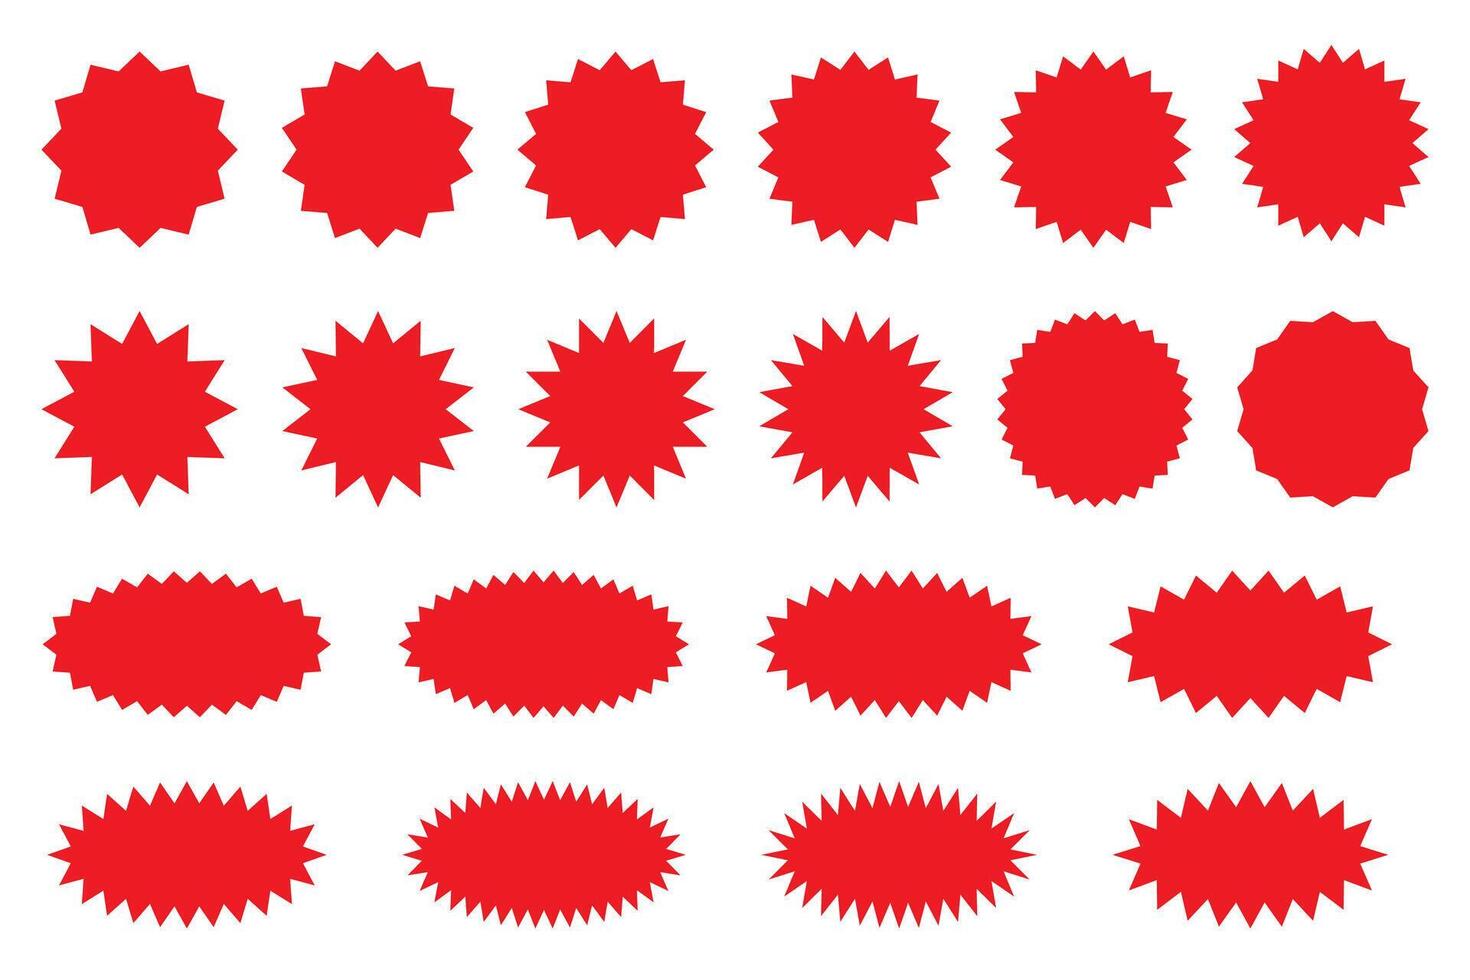 Starburst red sticker set - collection of special offer sale round and oval sunburst labels and buttons isolated on white background. Stickers and badges with star edges for promo advertising. vector